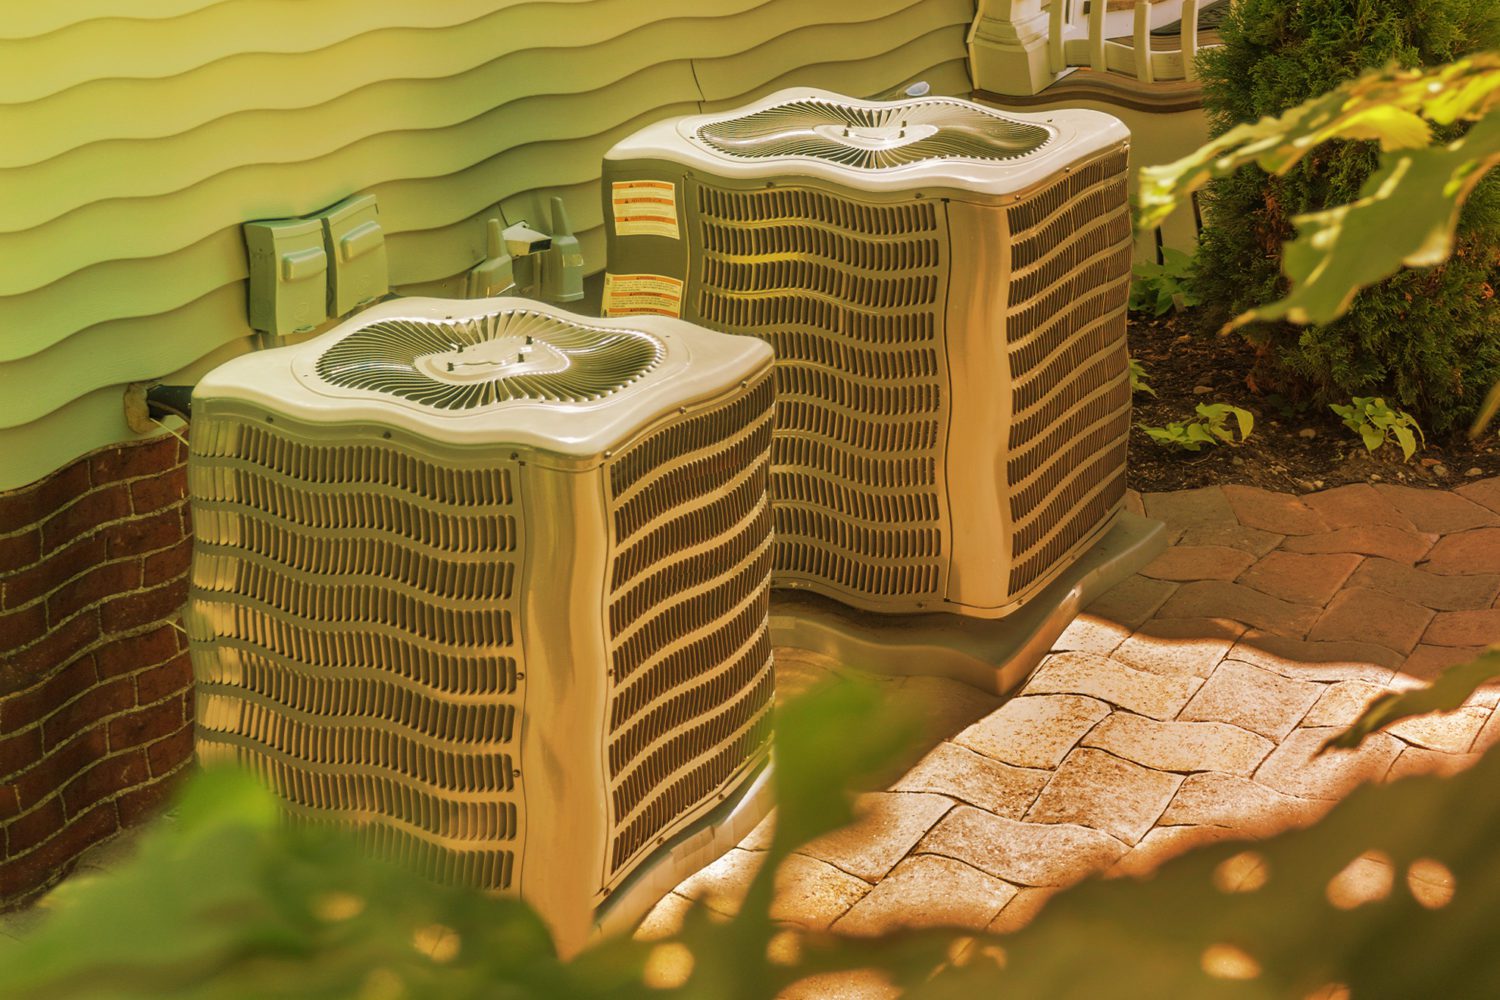 How Does Extreme Heat Affect Air Conditioners?